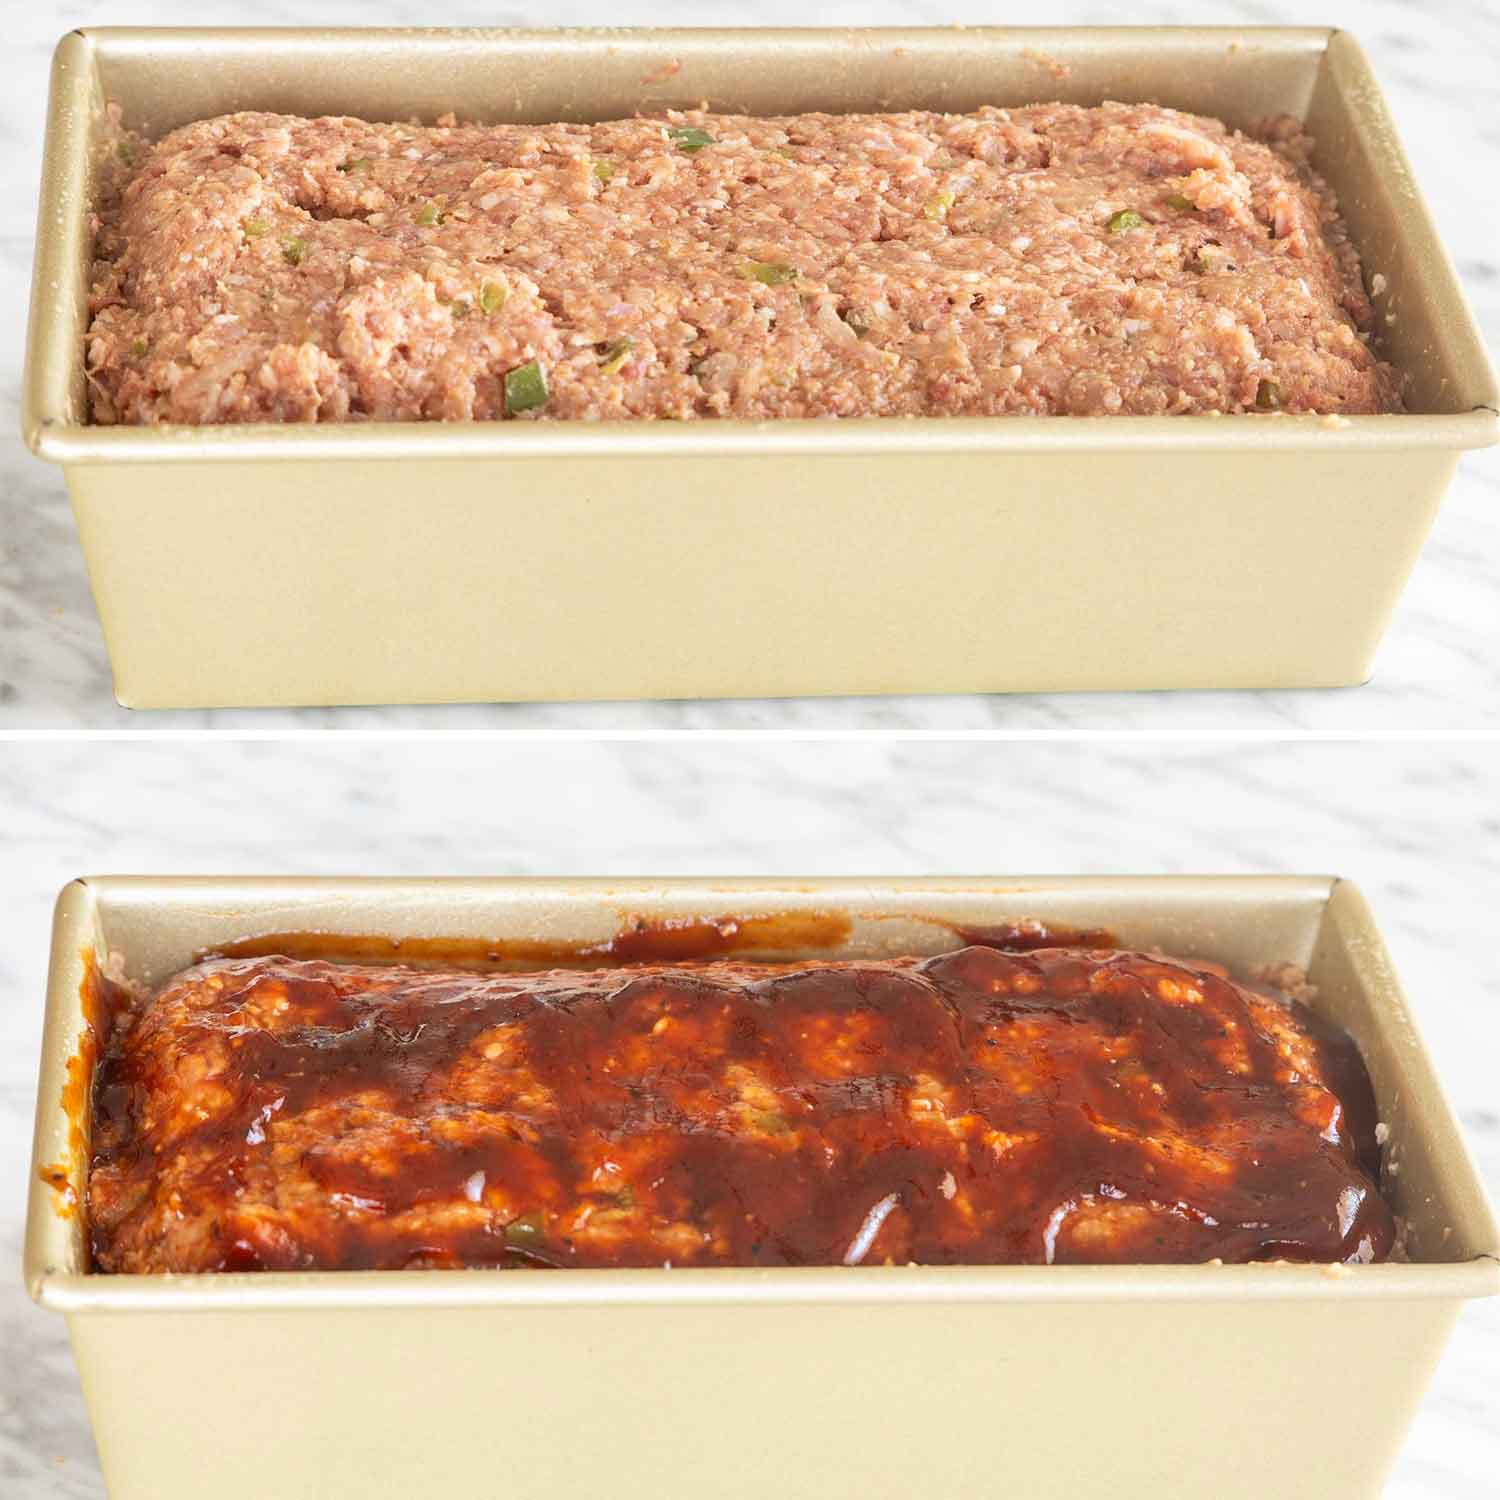 process shots showing how to make meatloaf.